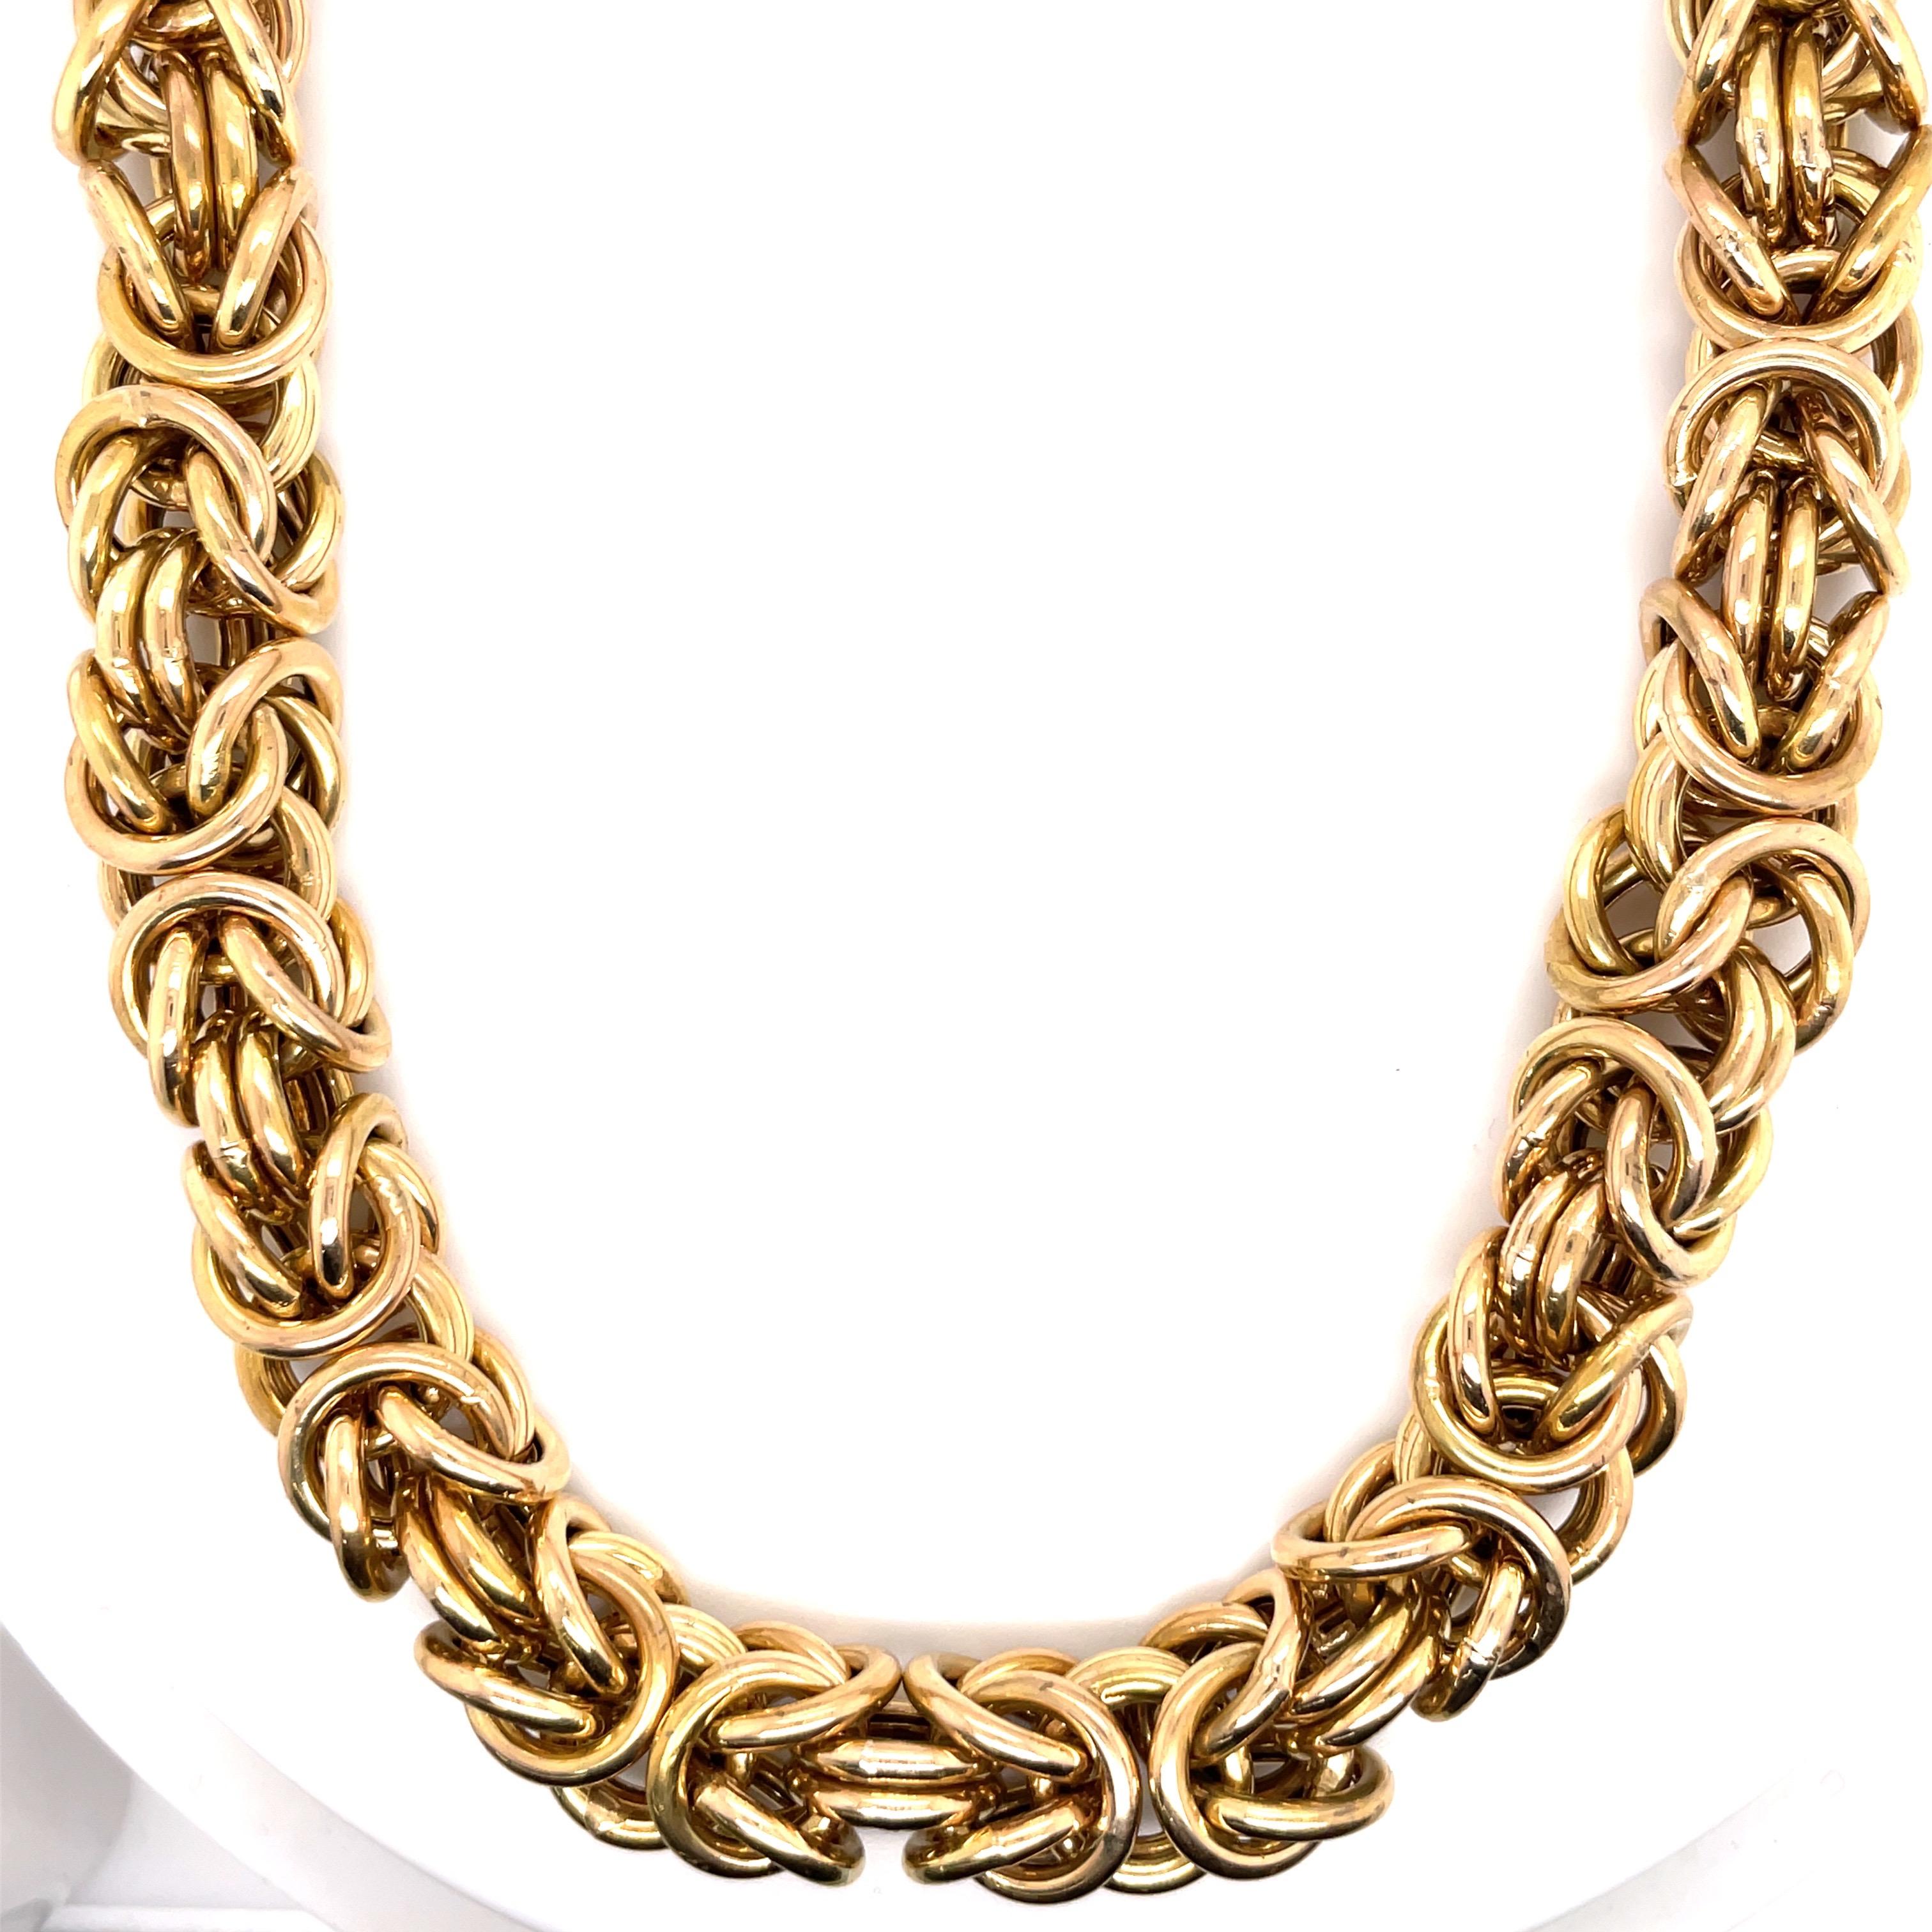 14 Karat Yellow gold necklace featuring a wide Byzantine style link measuring 17.5 inches and weighing 105.6 Grams.
Very comfortable on the neck. 